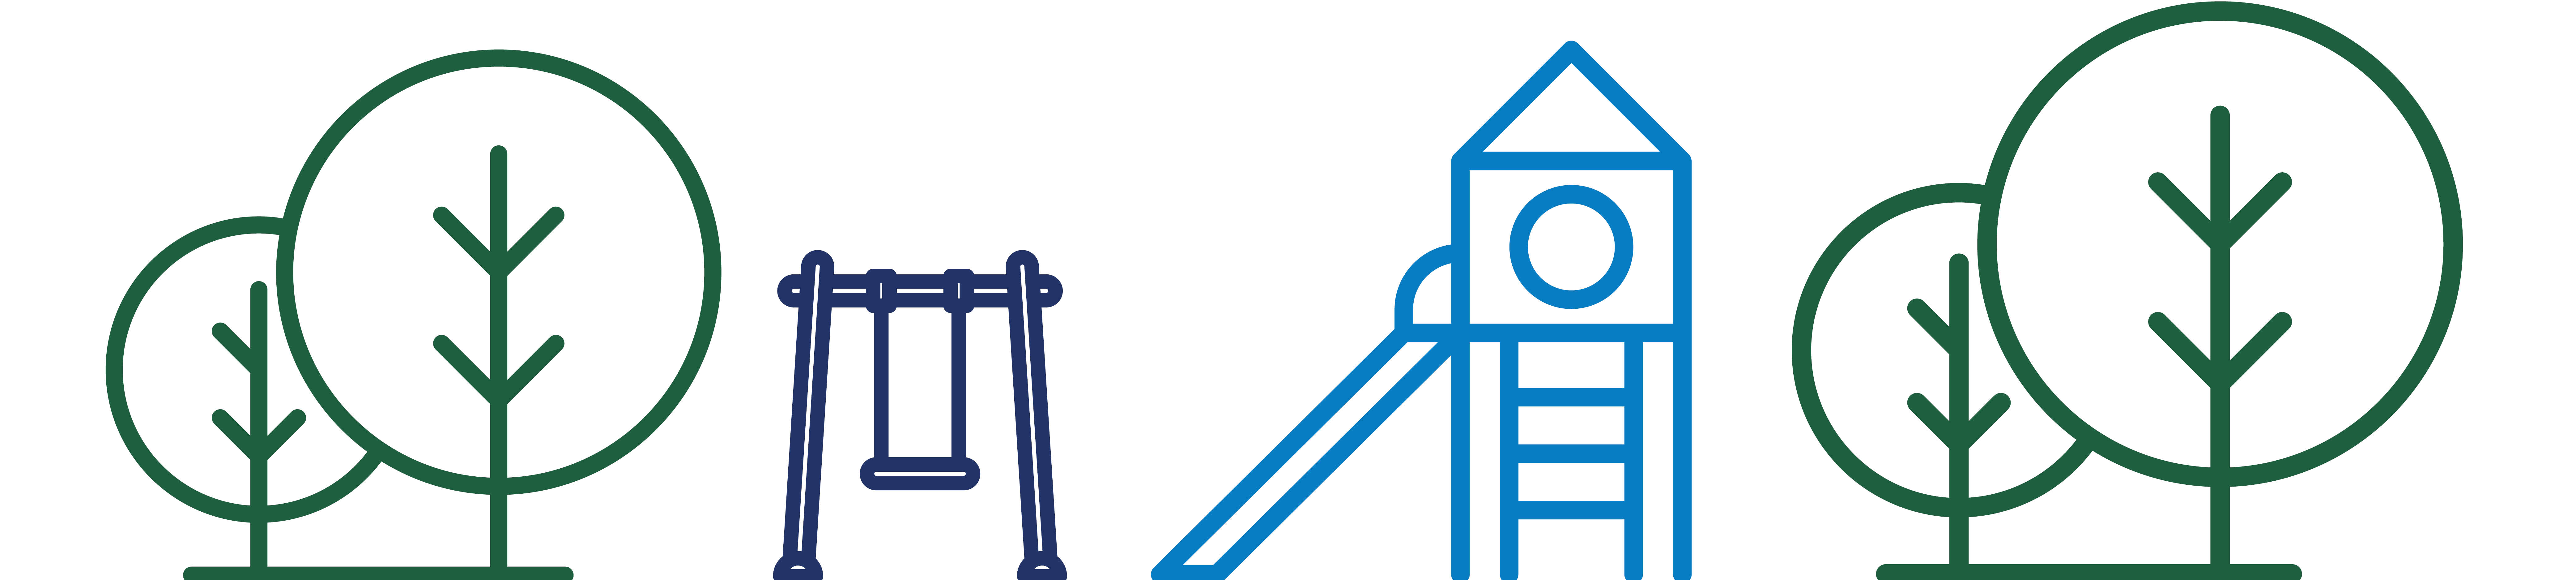 Line icons of trees, swing and playground equipment.